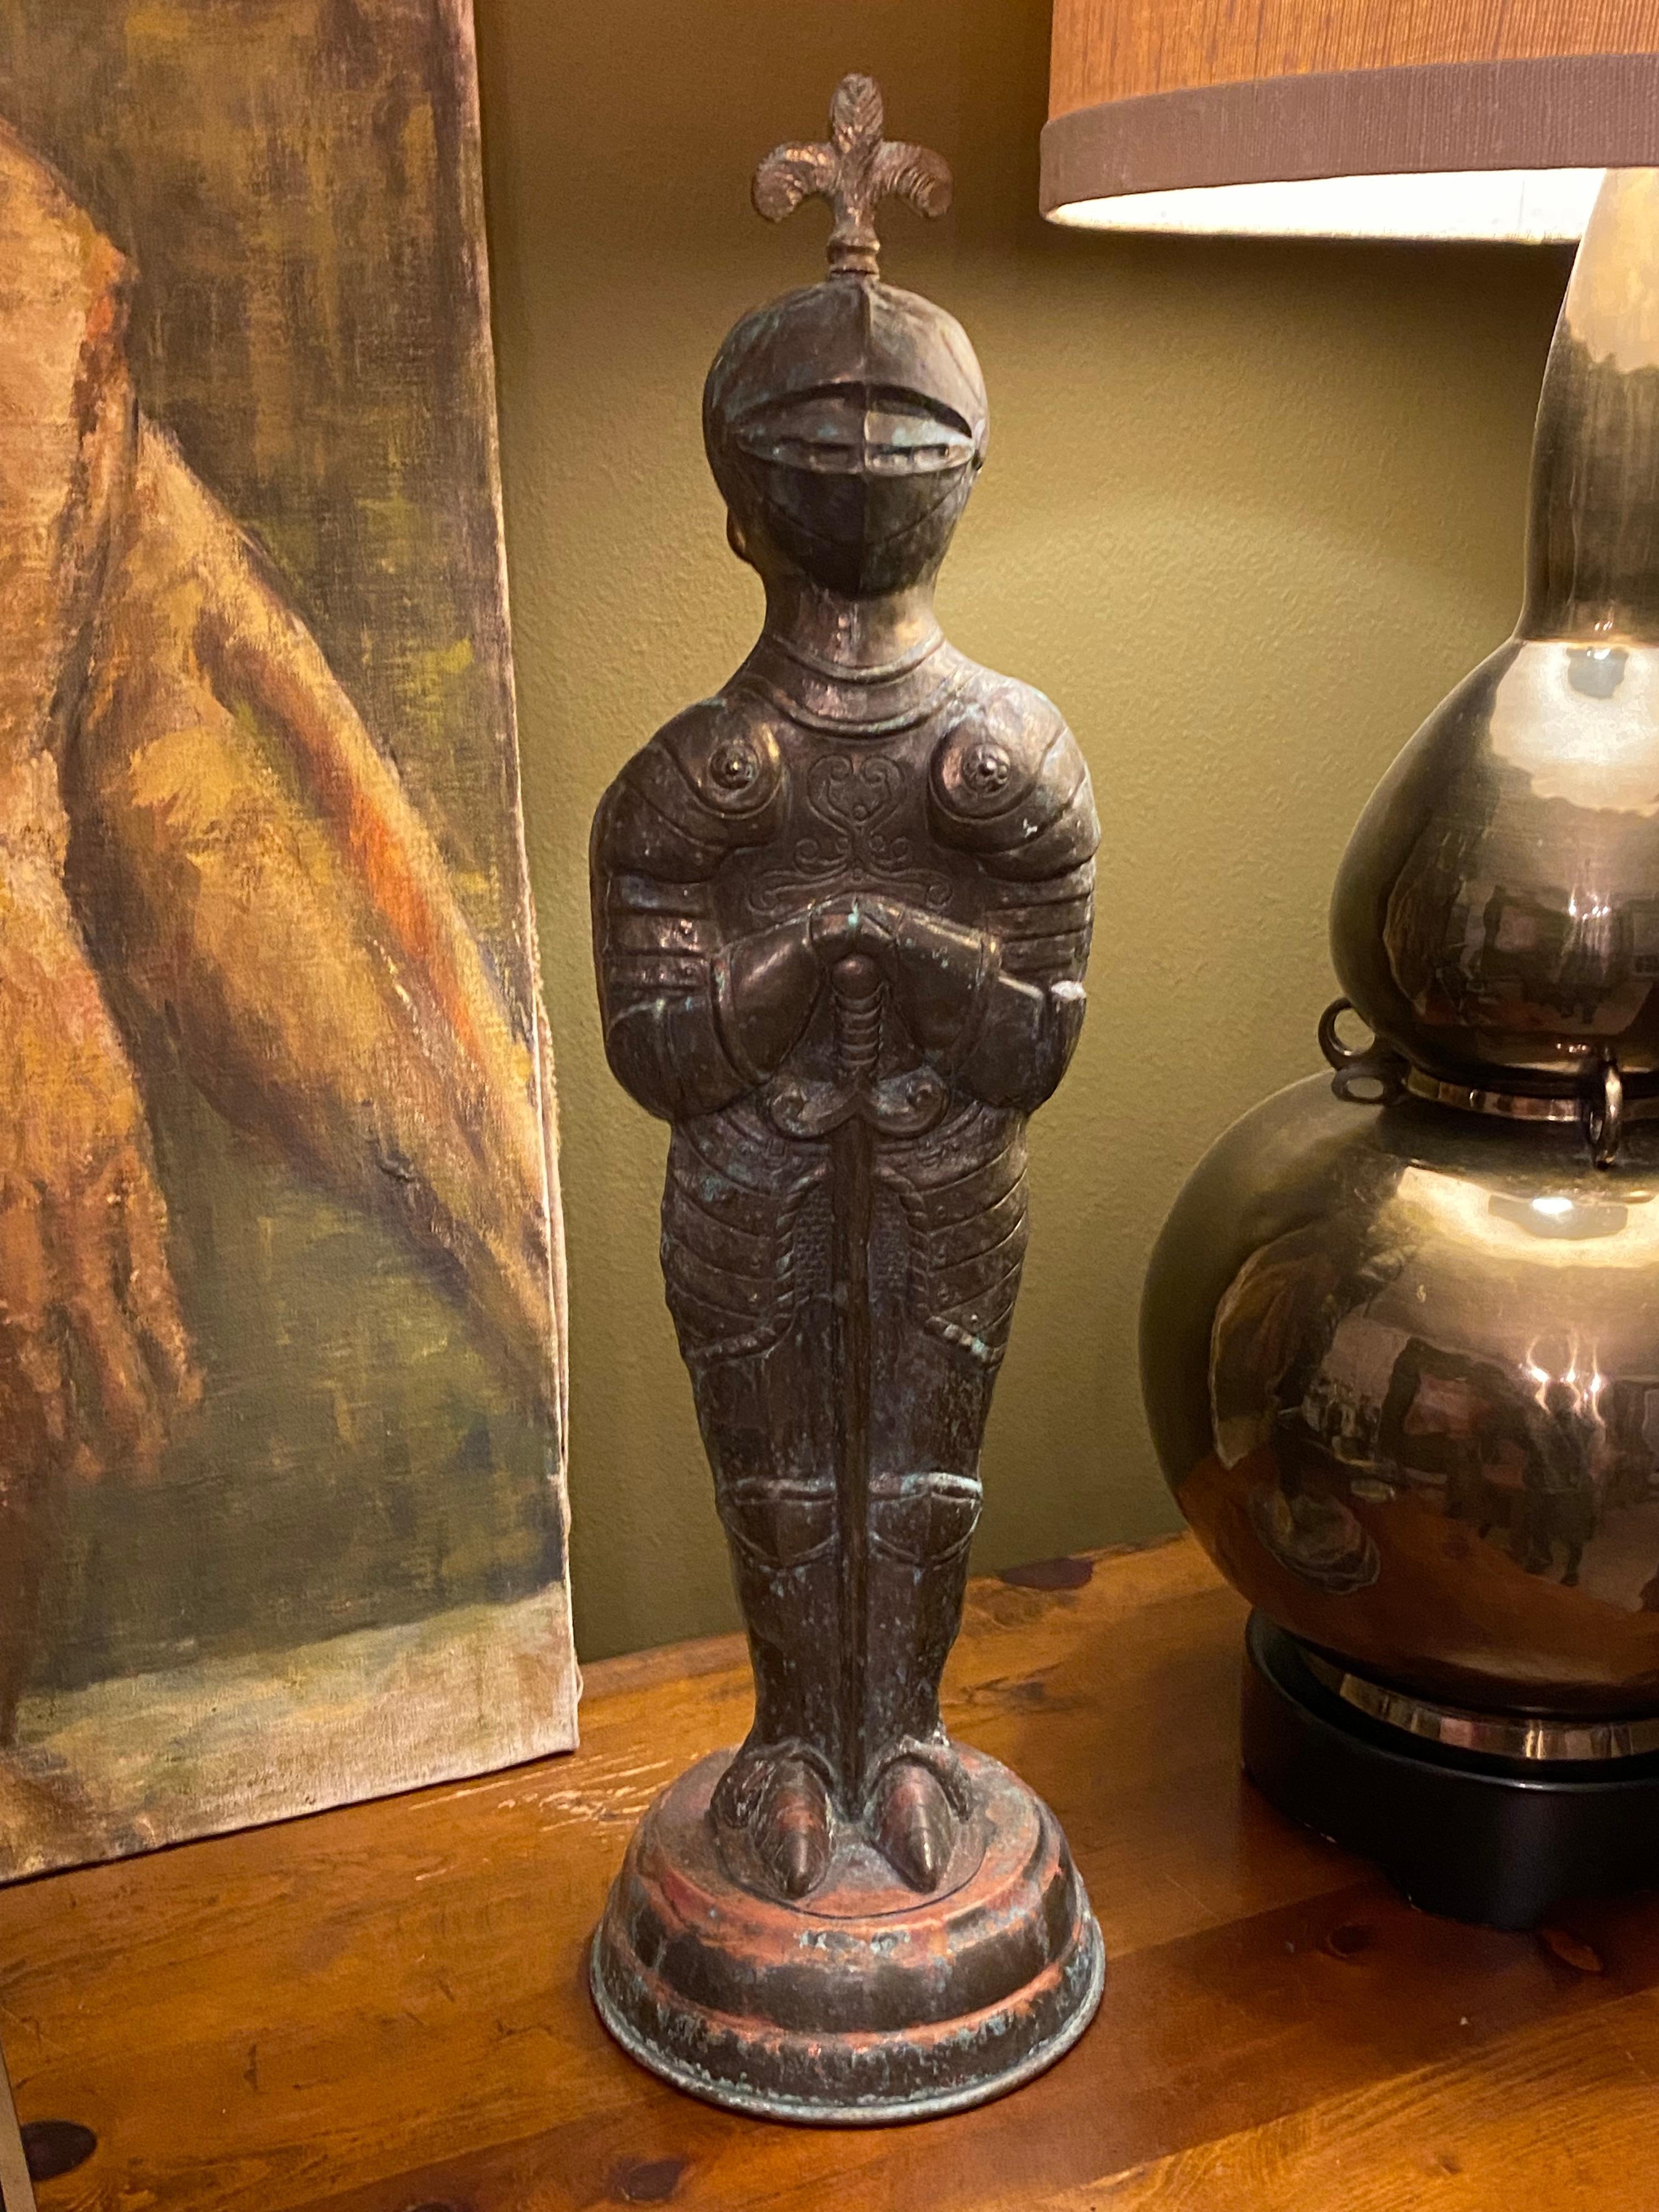 A one-of-a-kind copper, brass and bronze statue of a European knight, probably French, with an incredibly rich and colorful patina. This piece will have a strong presence in any room. Standing at 24.5